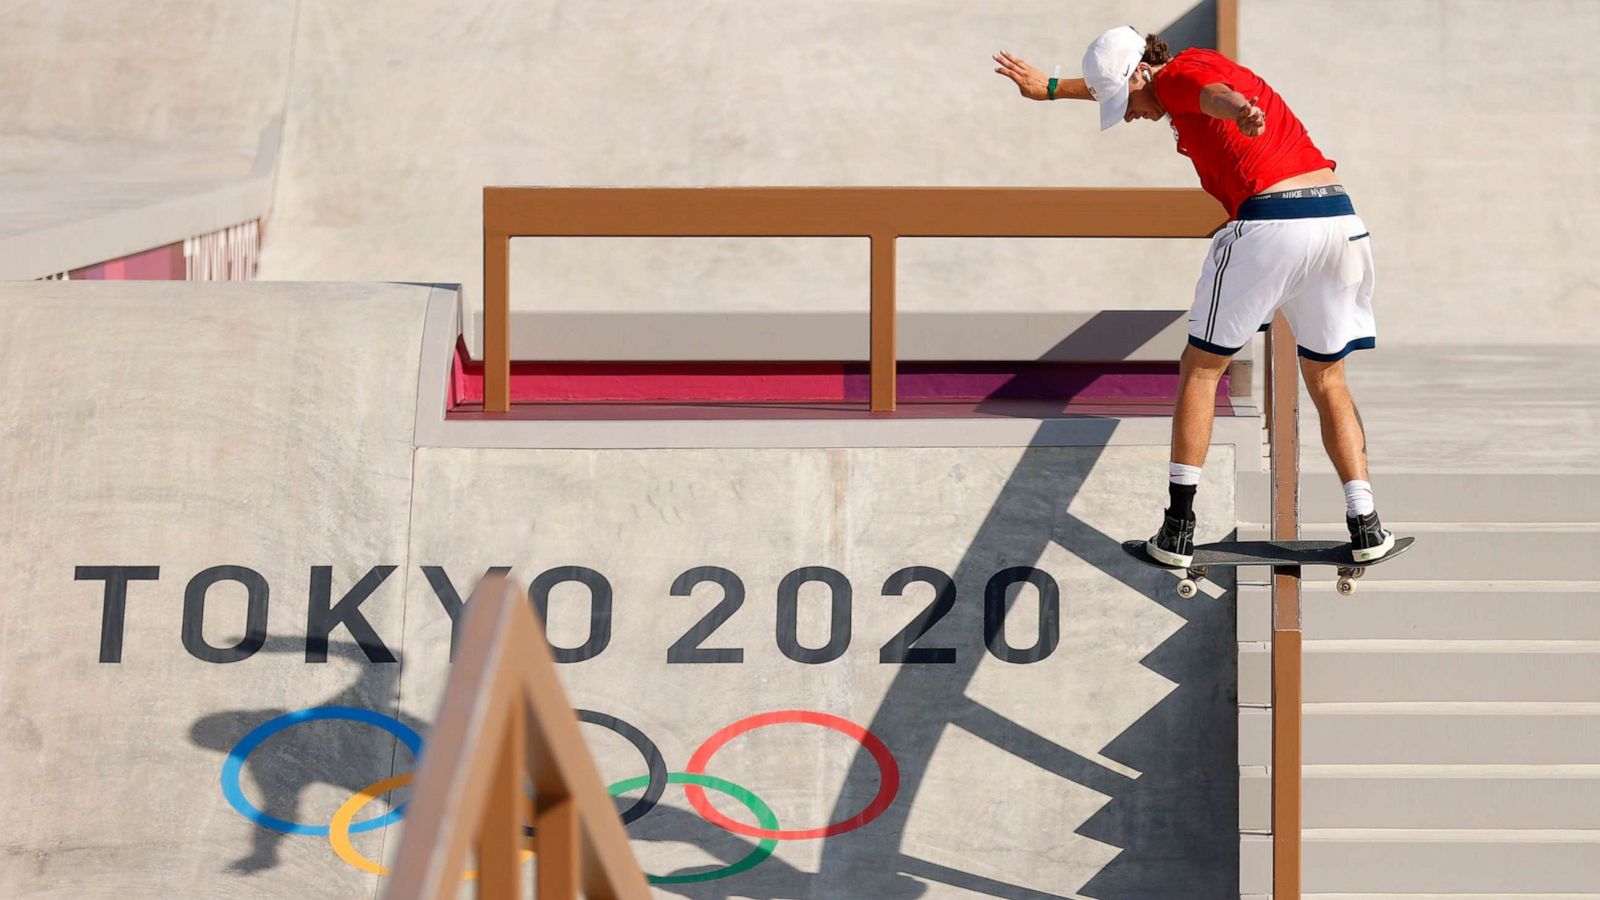 Skateboarding makes its way to Olympics, from to competition - ABC News